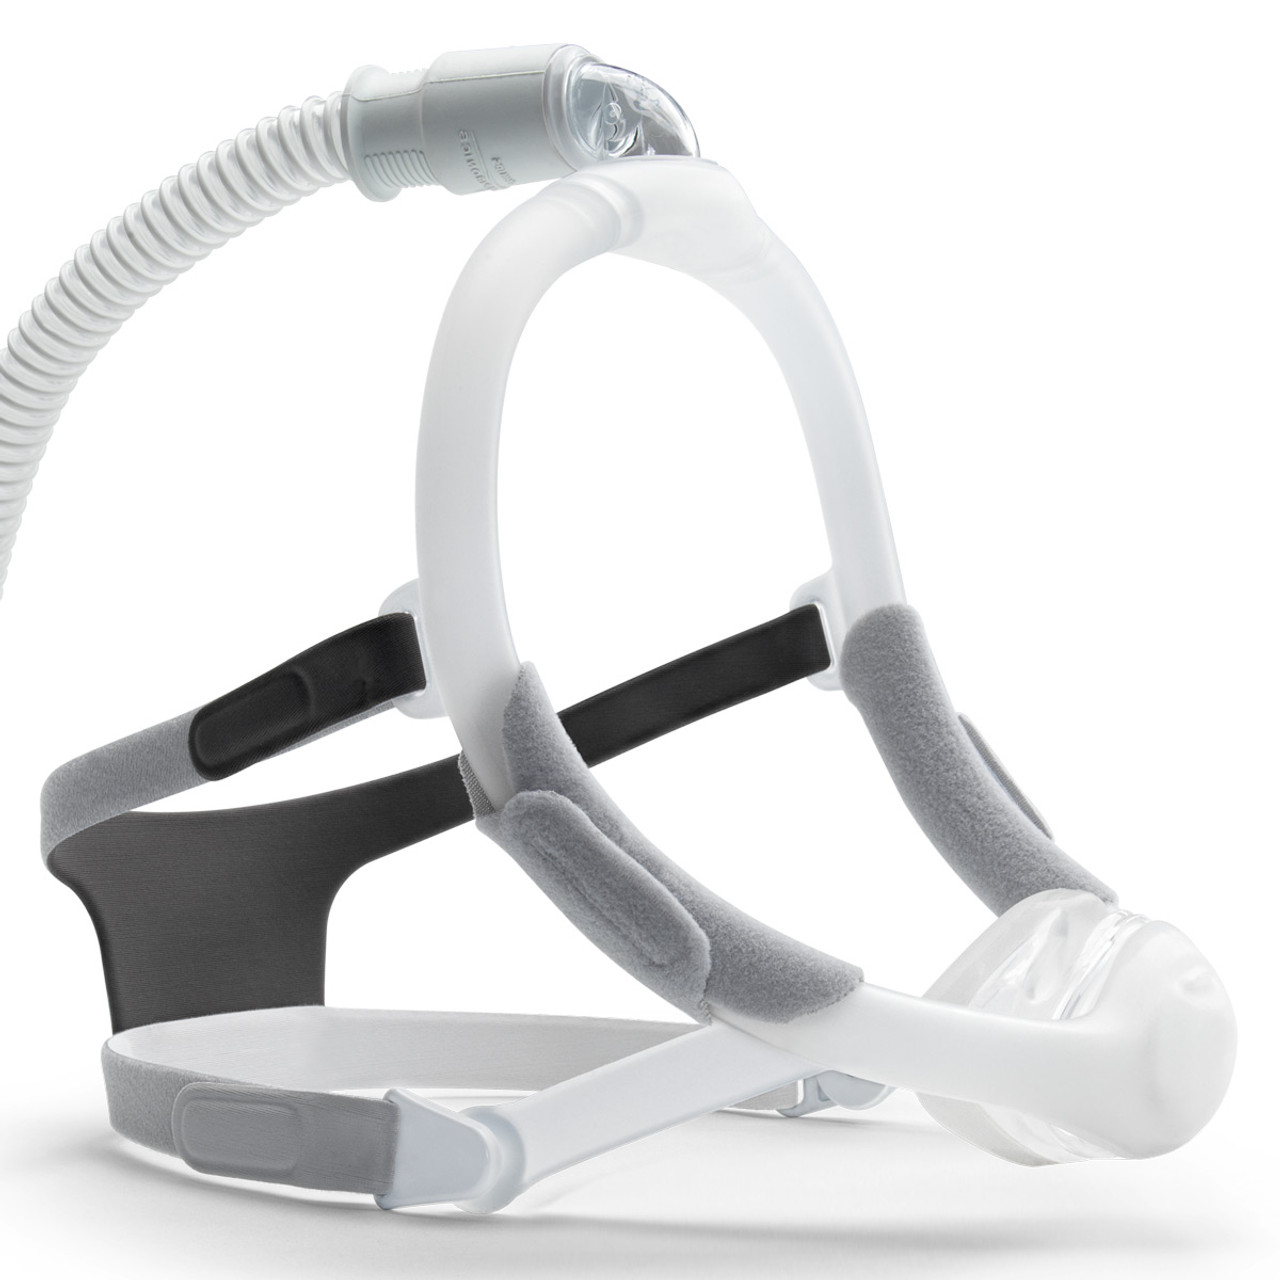 Philips Respironics Nasal Mask With Headgear Dreamwisp Fit Pack Gocpap Llc 2153